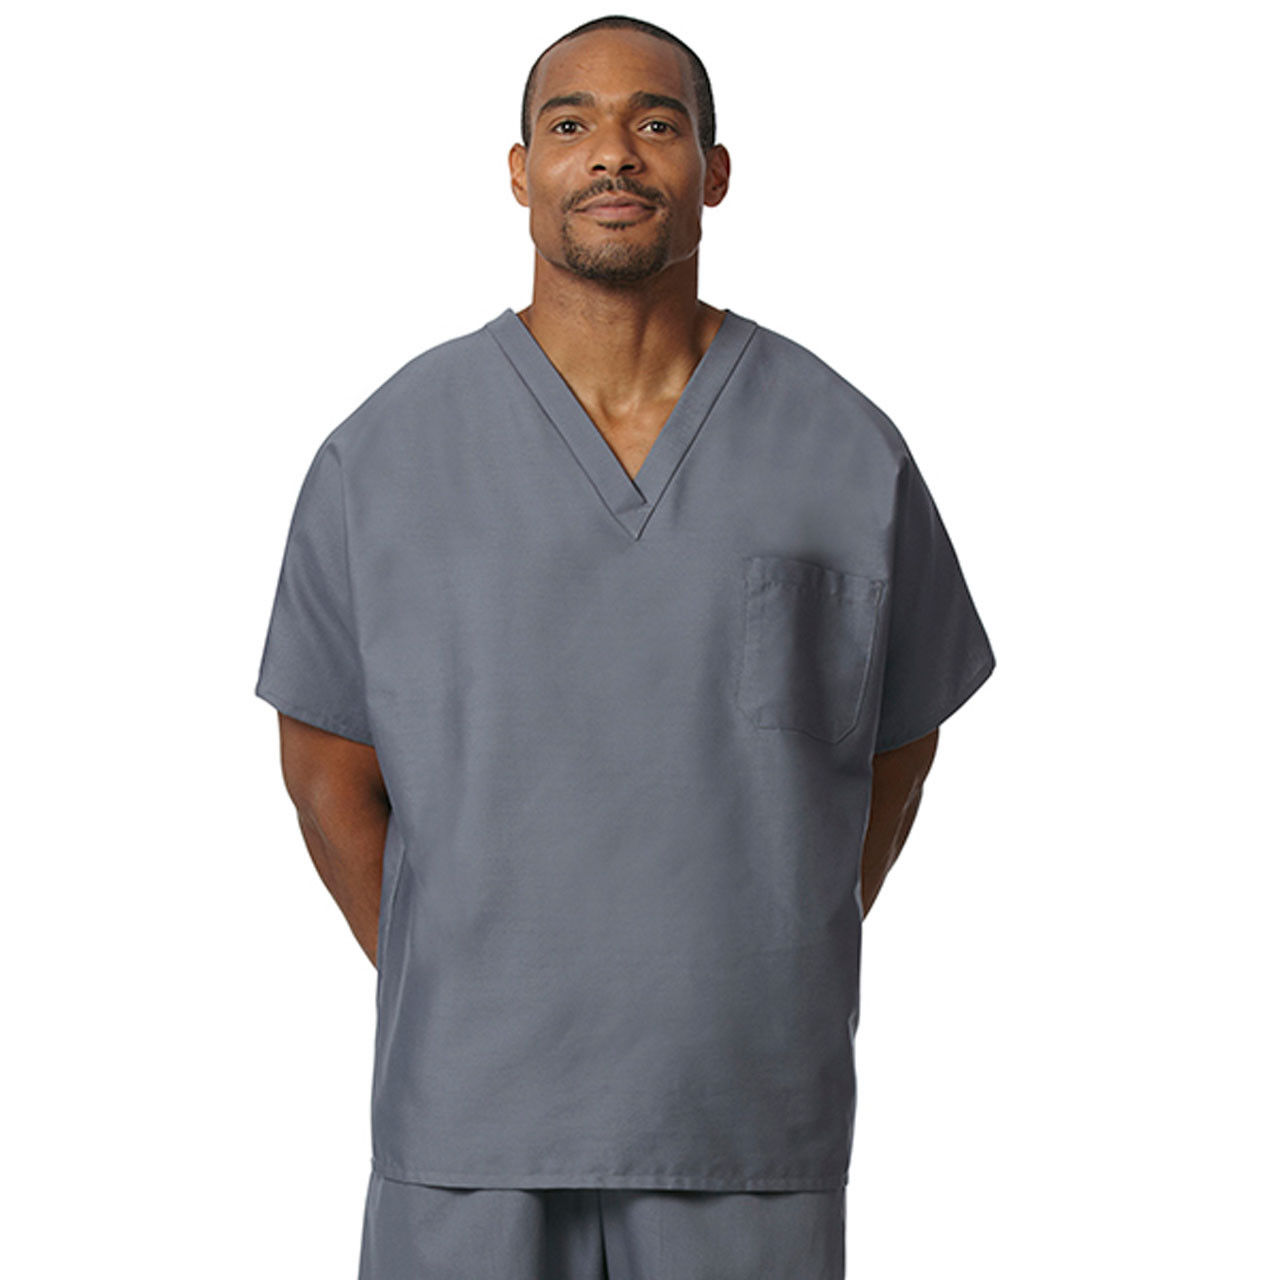 What industries are the Womens and Mens Tall Scrub Tops suitable for?